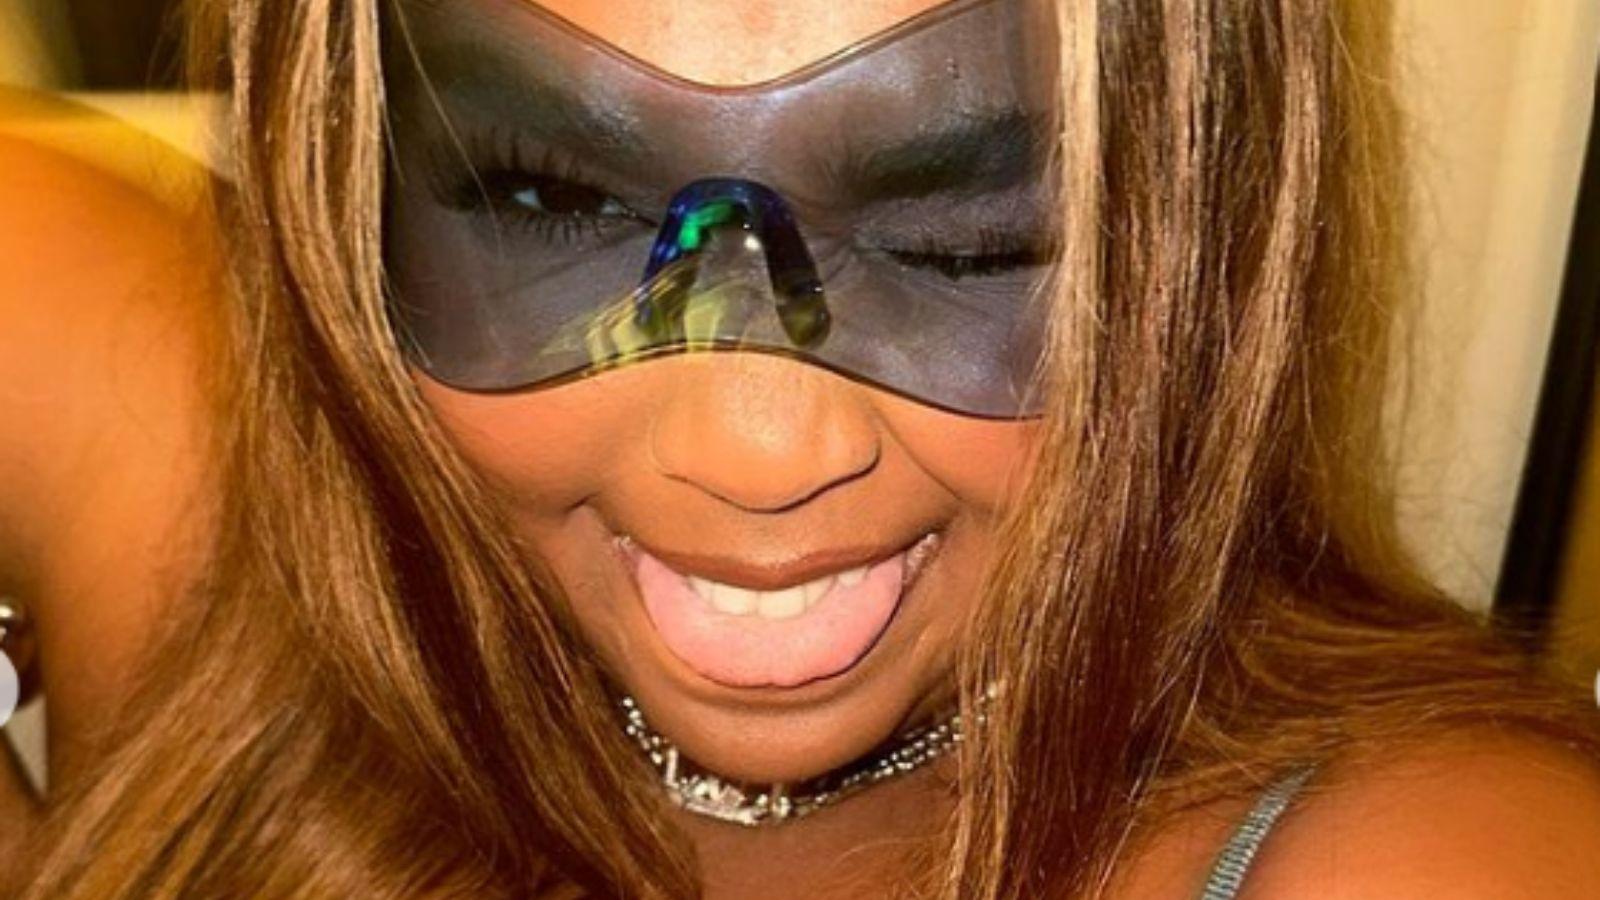 Lizzo posing with glasses on